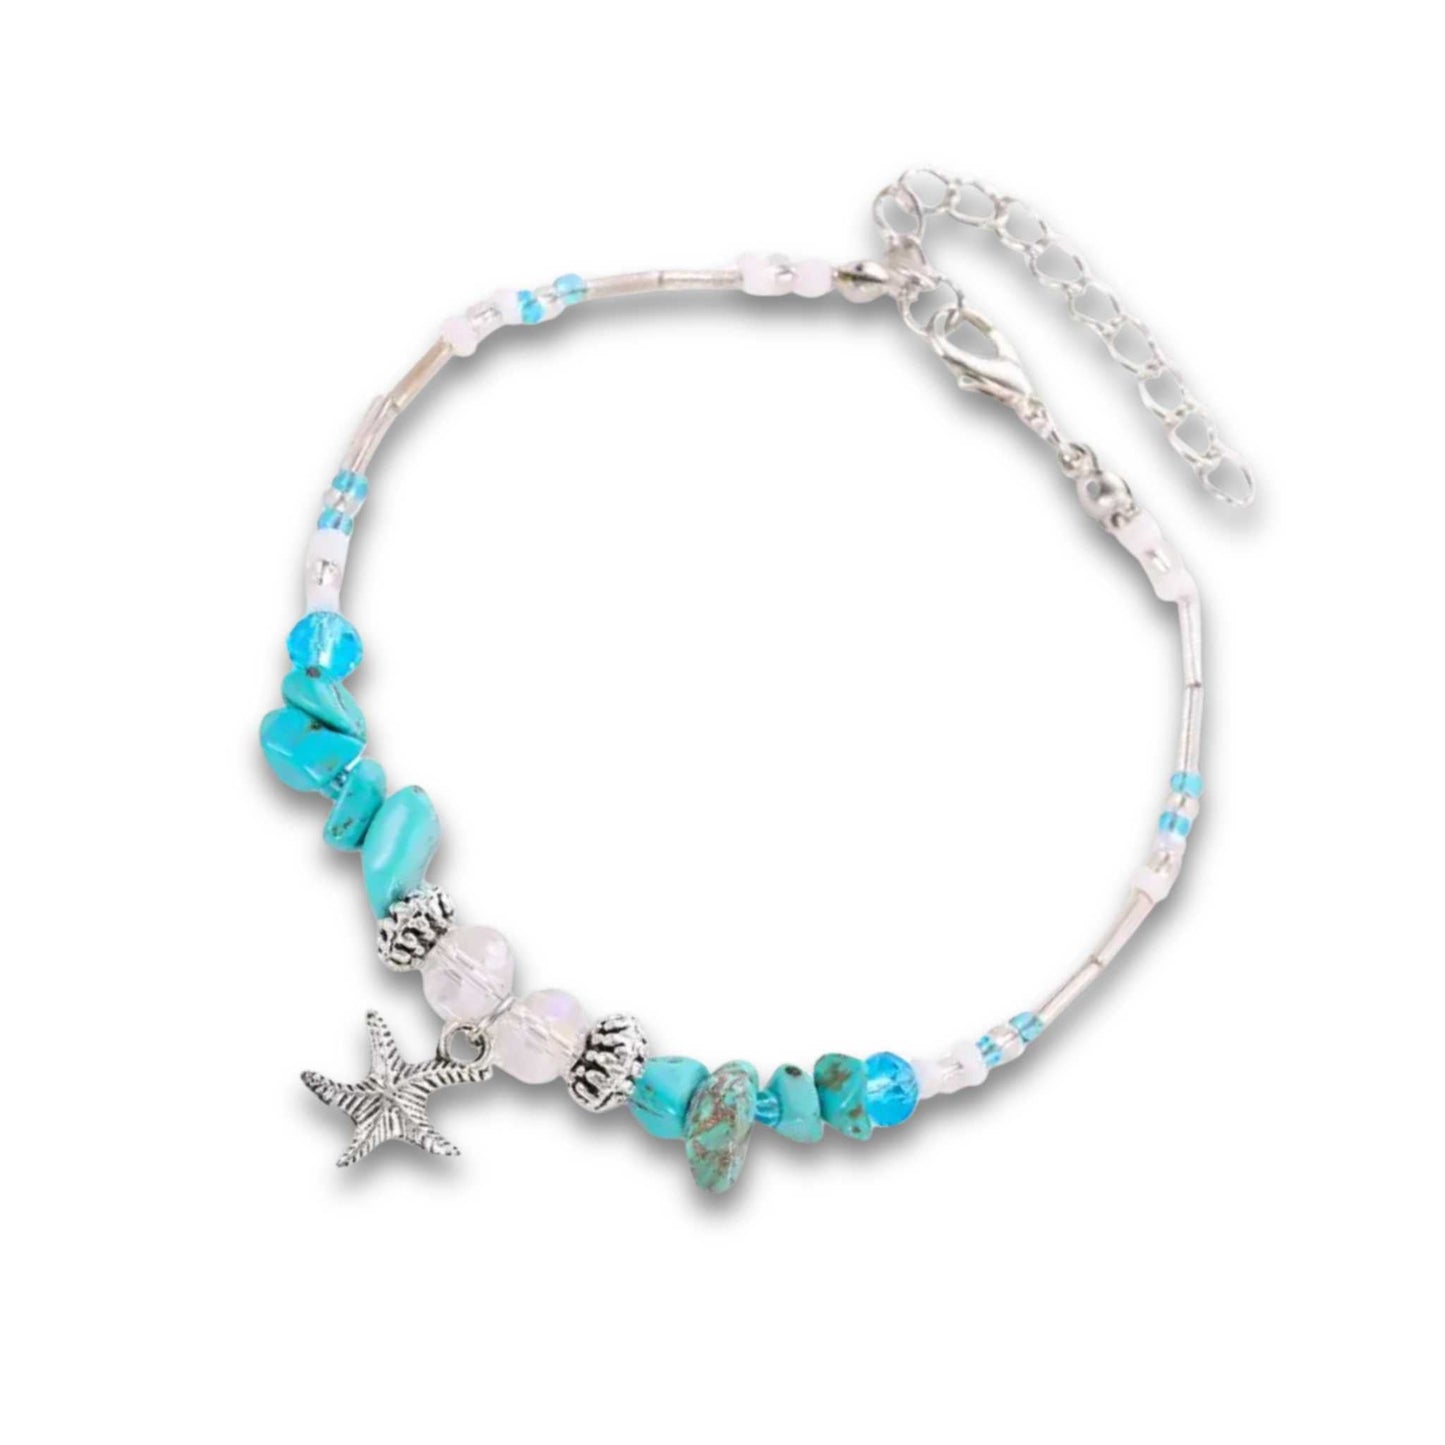 Soul Valley Tribe Bohemian Blue Turquoise & Starfish Beaded Anklet Anklet